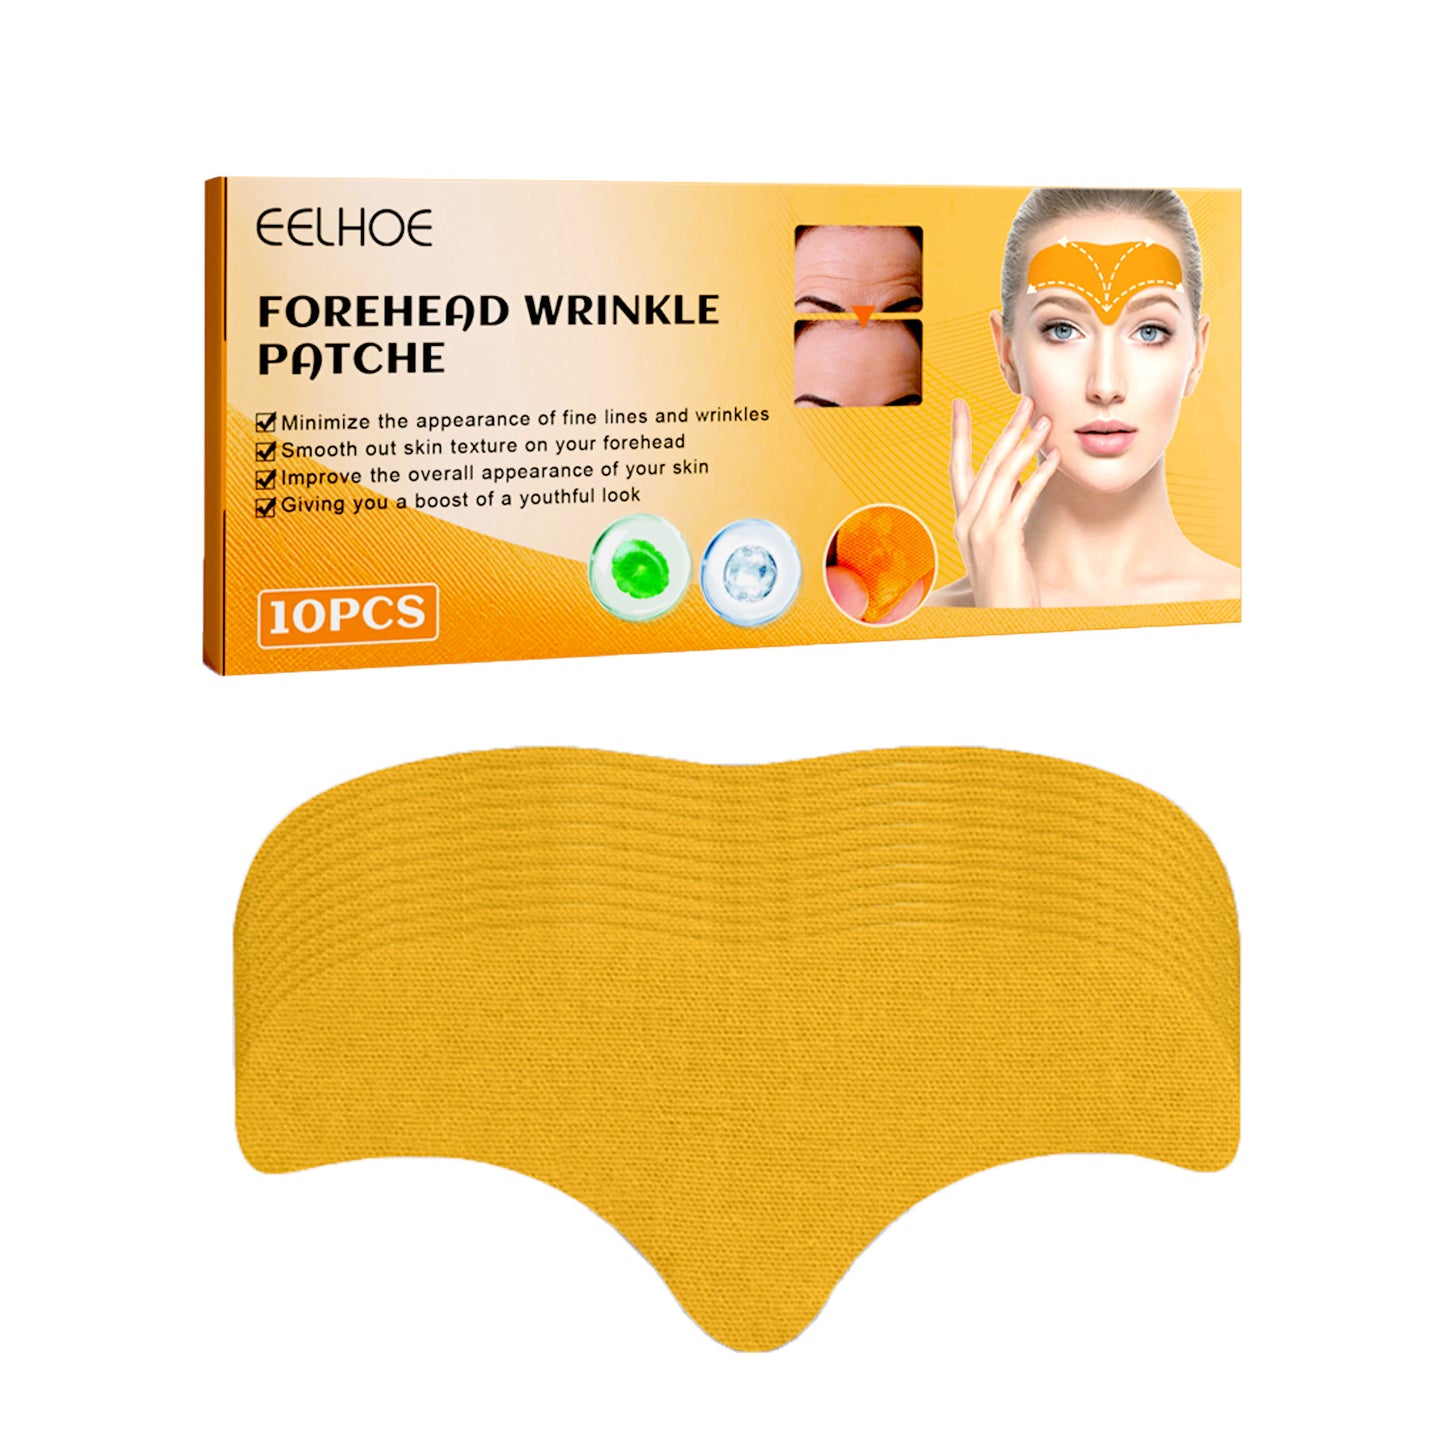 EELHOE Forehead Wrinkle Patch To Fade, Smooth Wrinkles, Lift And Tighten Facial Skin Anti Wrinkle Patch (10pcs)